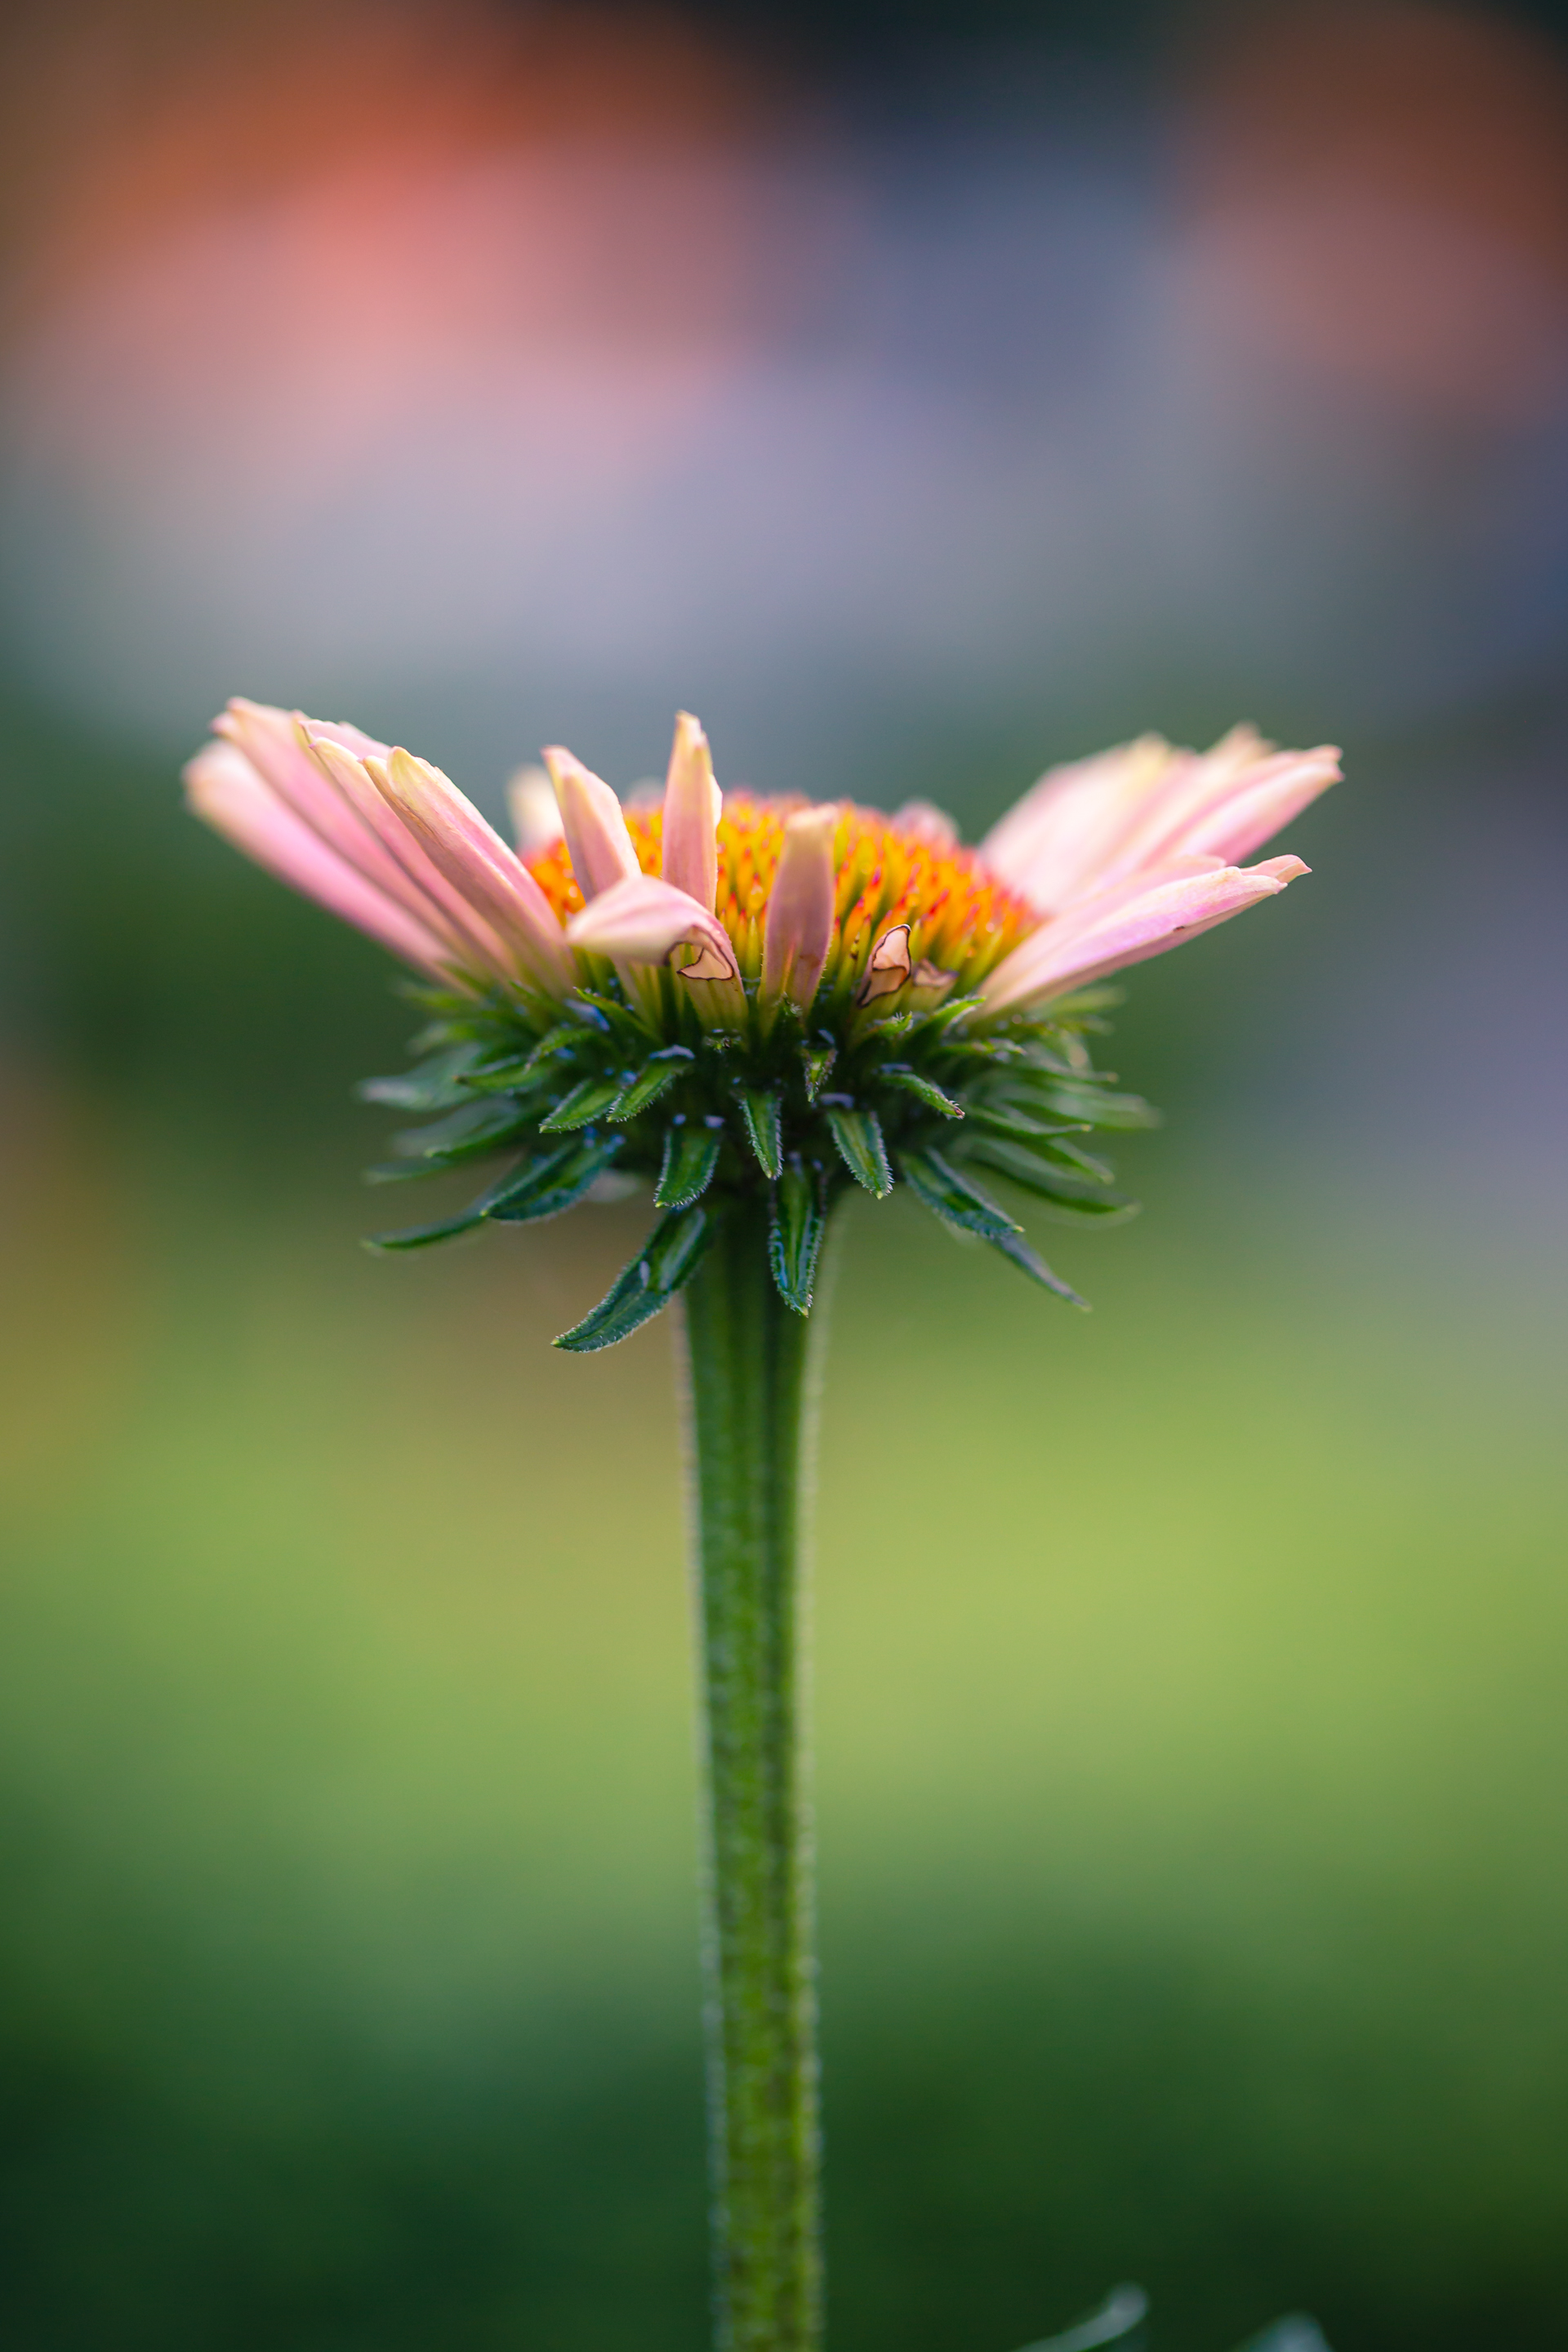 100mm portrait orientation macro photograph of single a purple coneflower blossoming. Soft bokeh smooths the background with pastel and green colors.